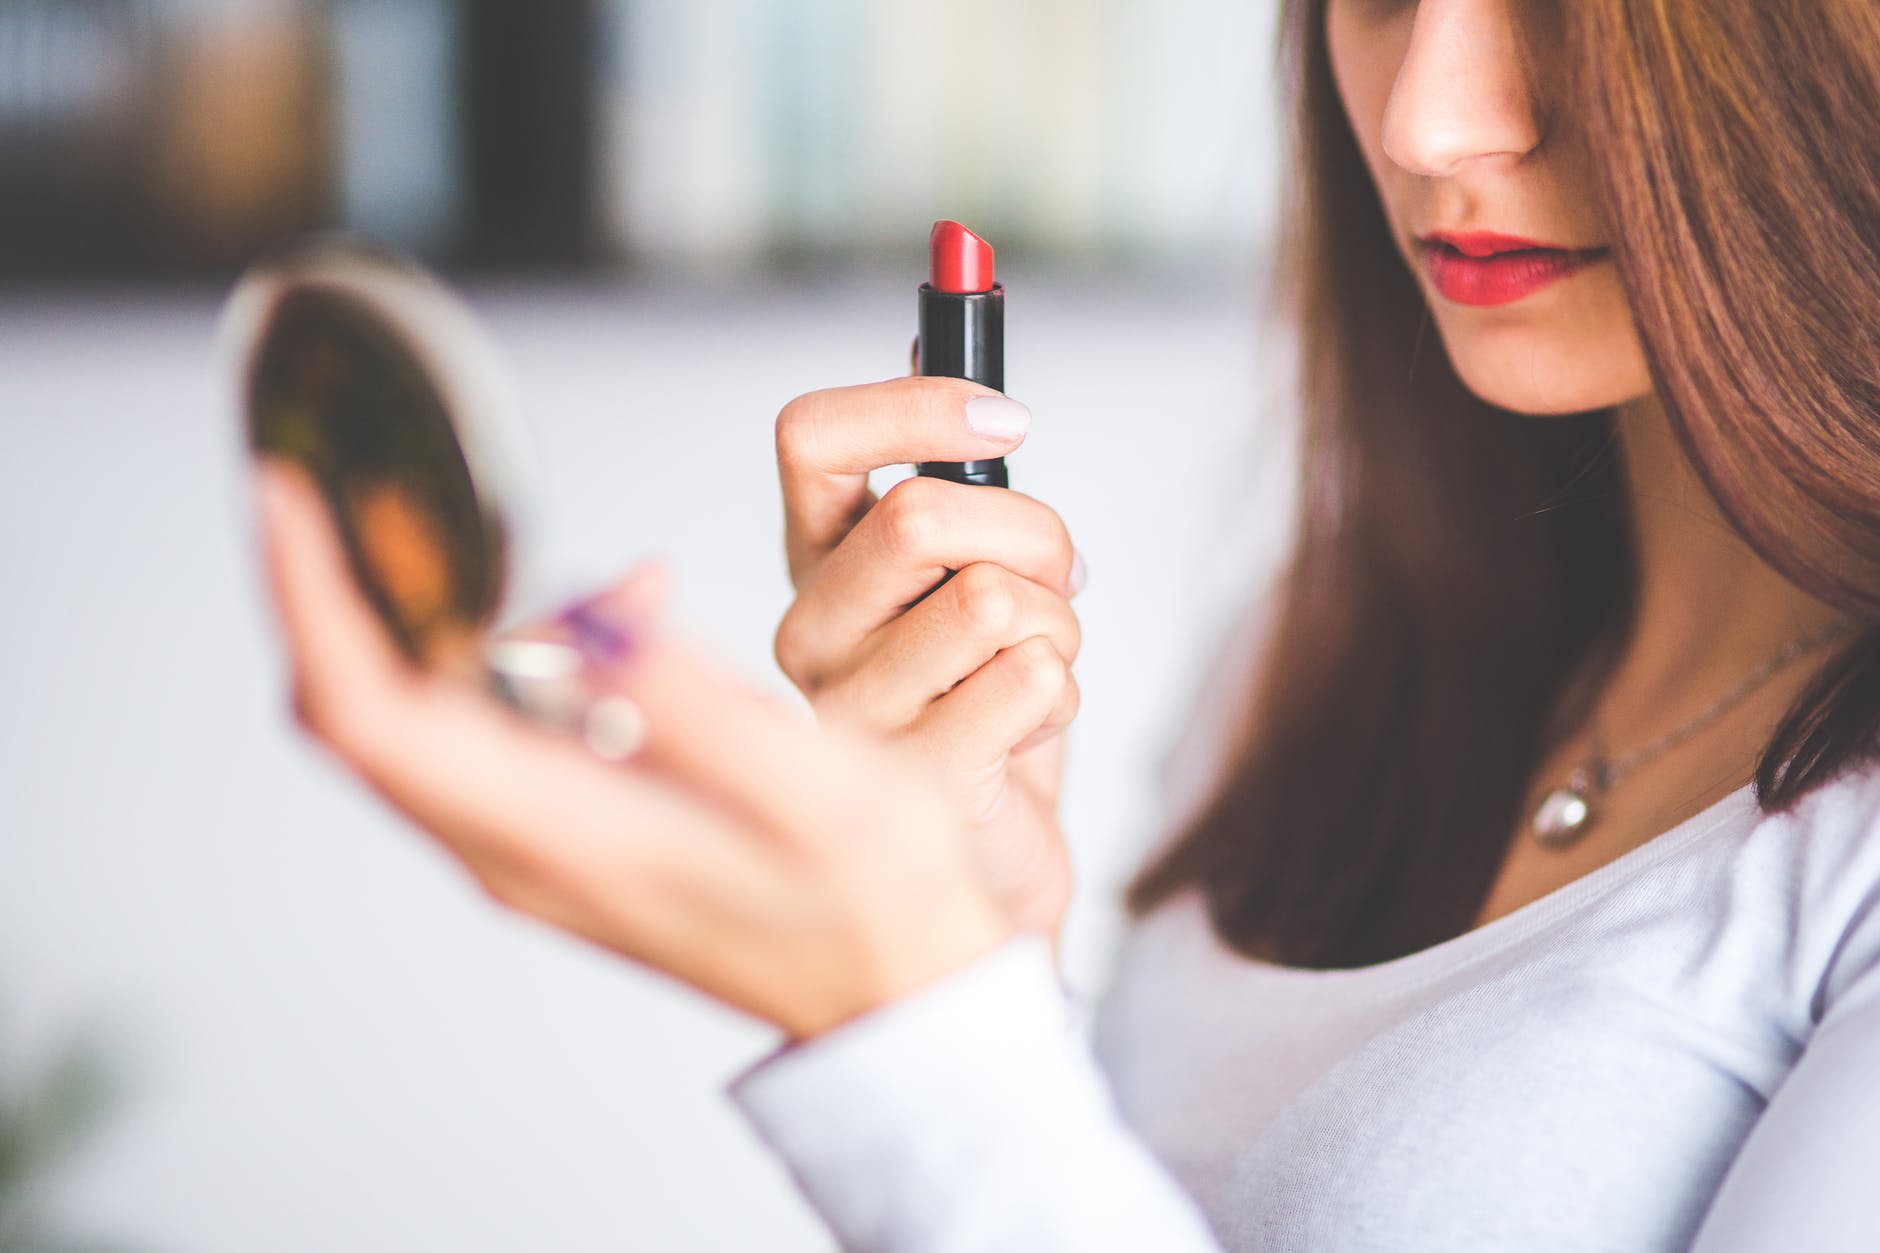 How to apply makeup professionally on yourself